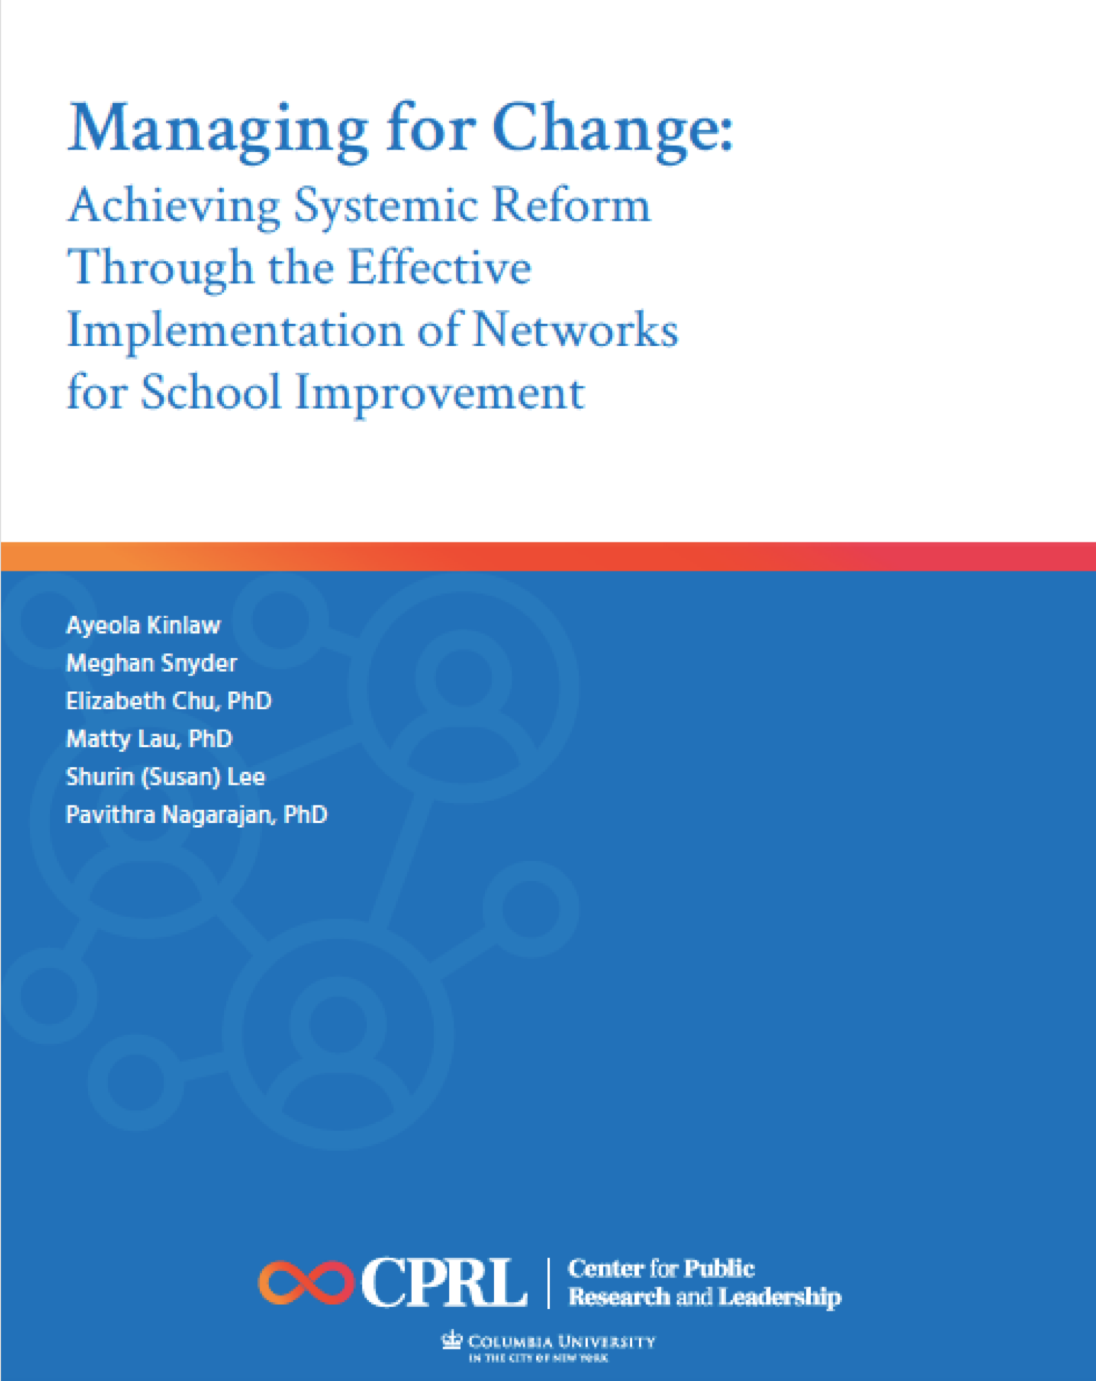 Cover page of the Managing for Change, CPRL's report on networks for school improvement